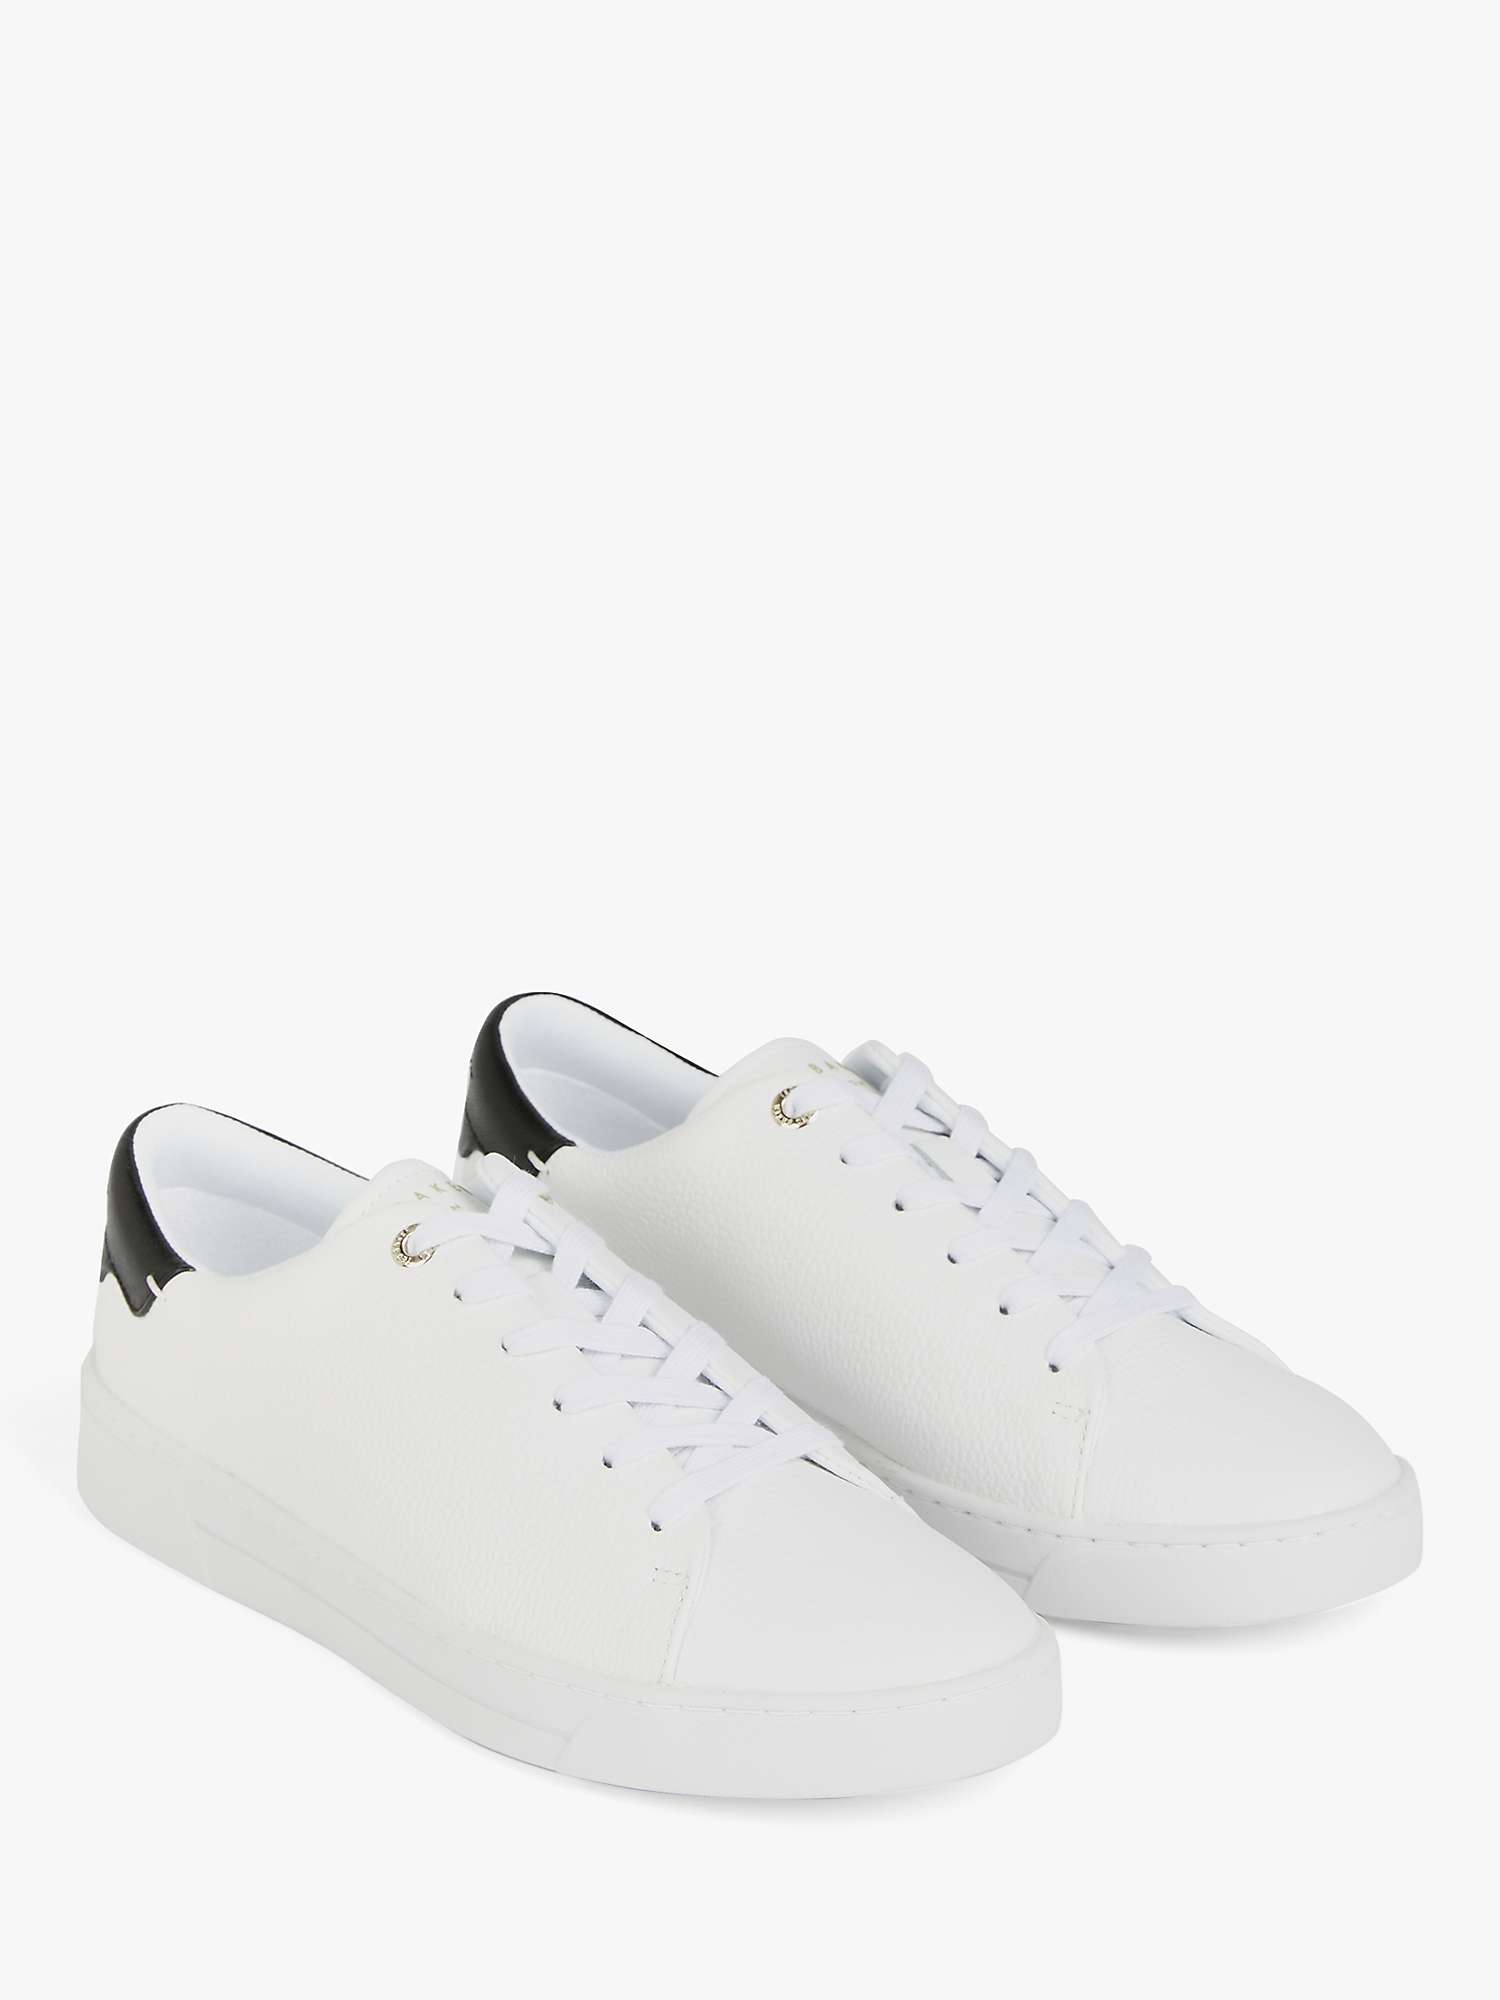 Buy Ted Baker Tumbled Leather Low Top Trainers, White/Black Online at johnlewis.com